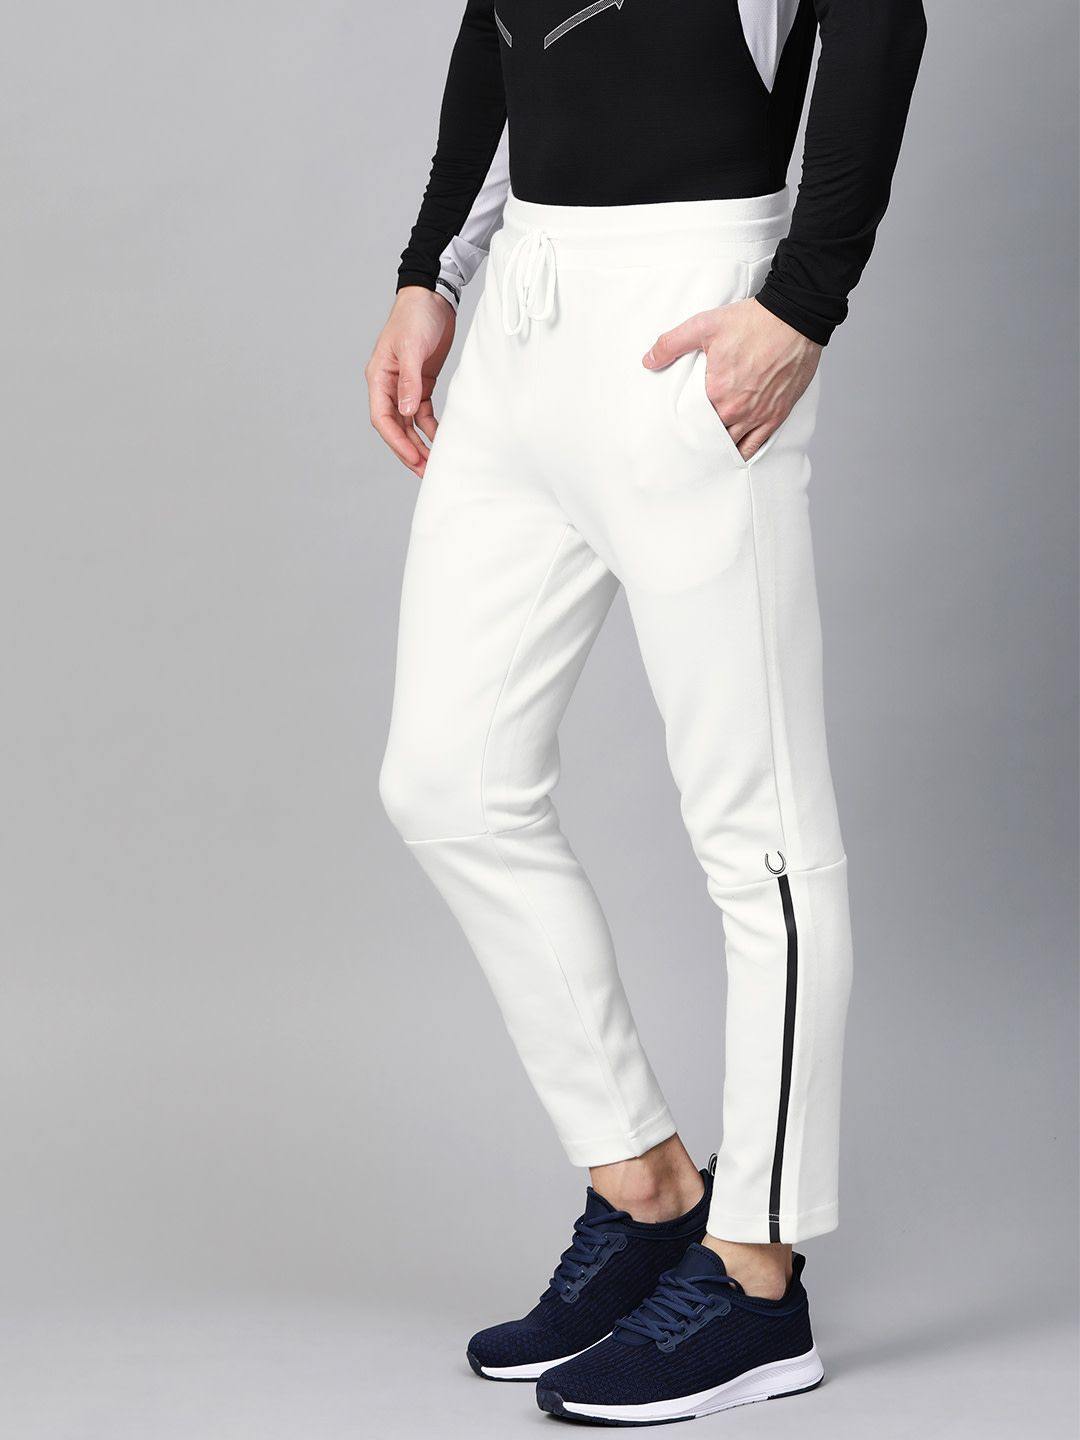 Multicolor Lower Slim Fit Track pants, Age: 14 Above, Size: 42